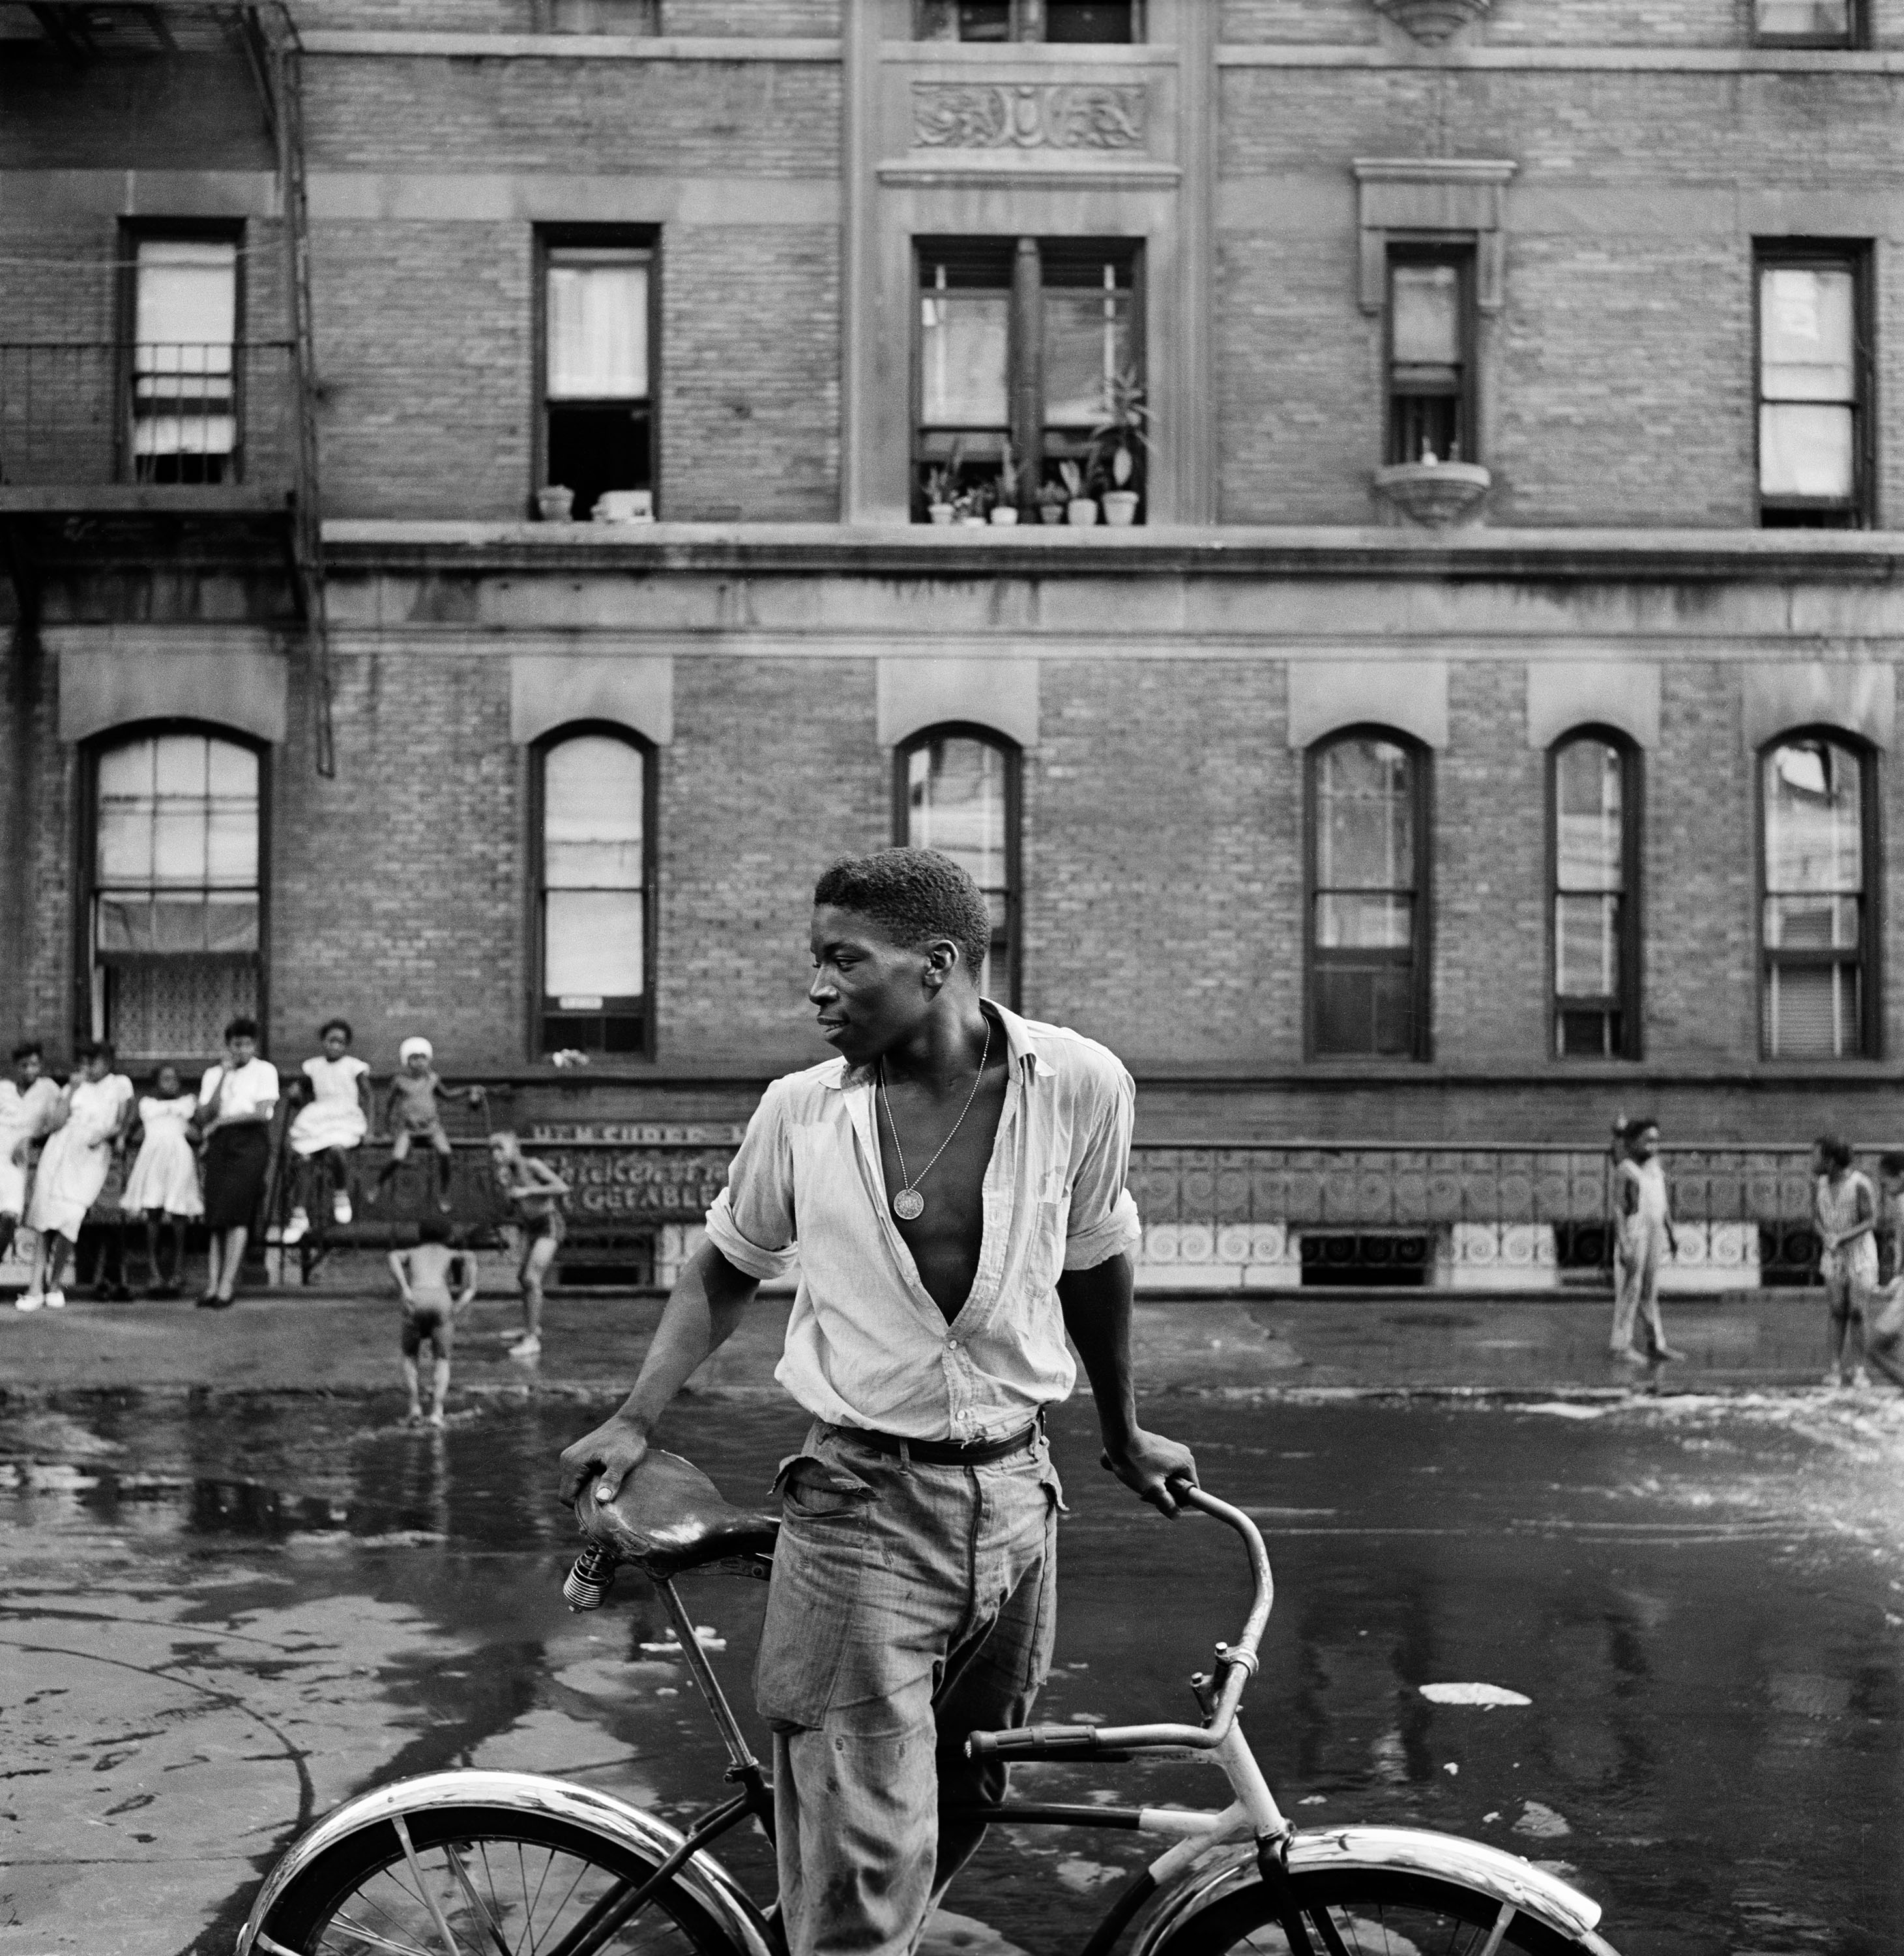 Young black man in white shirt, medallion and cargo pants stands astride a bike looking over his shoulder and smiling. In. background are brick apartment building, women leaning against a fence, and children playing in puddles.